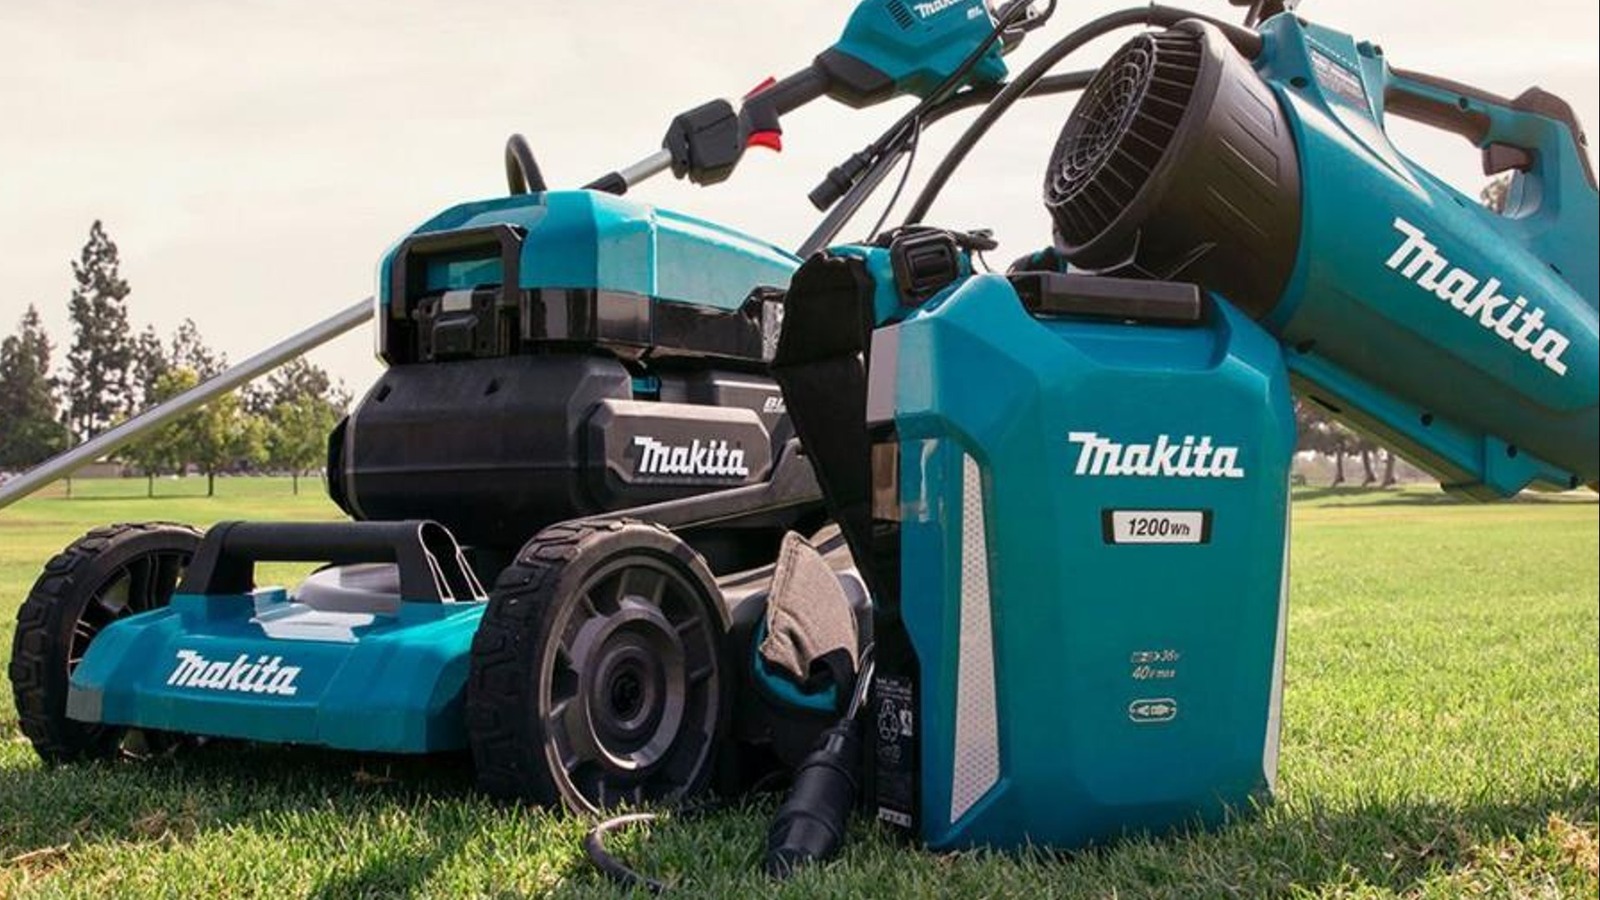 Makita’s ConnectX Technology: What it is and Which Tools are Compatible